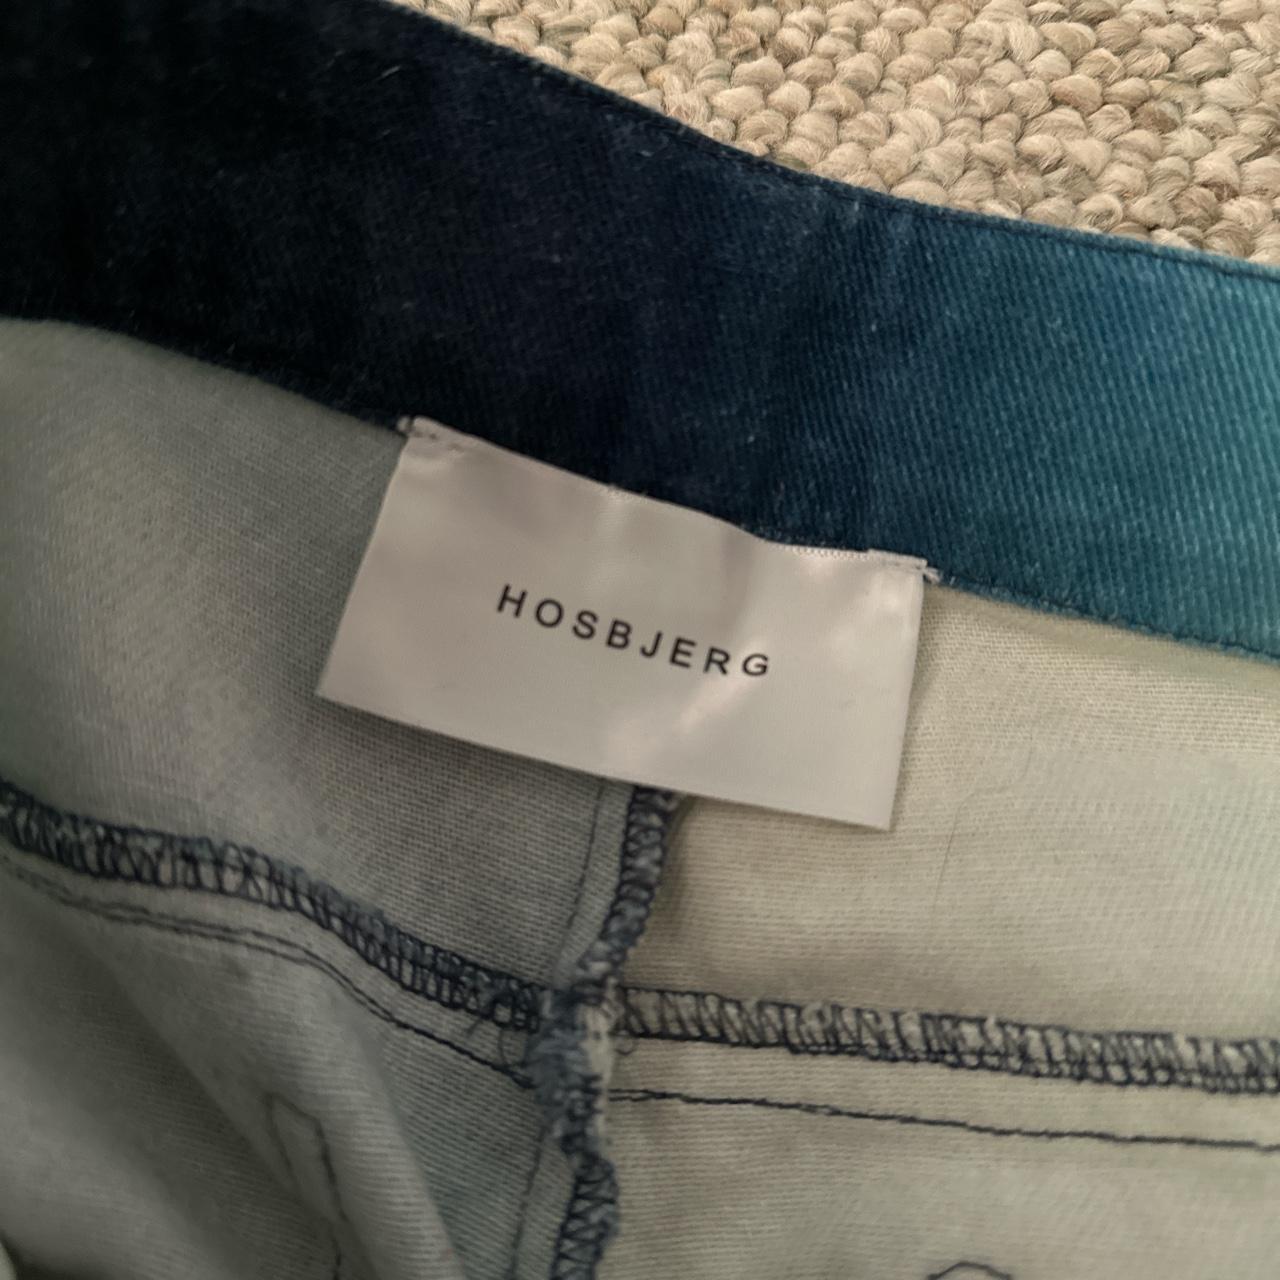 Hosbjerg Women's Blue and Yellow Jeans (3)